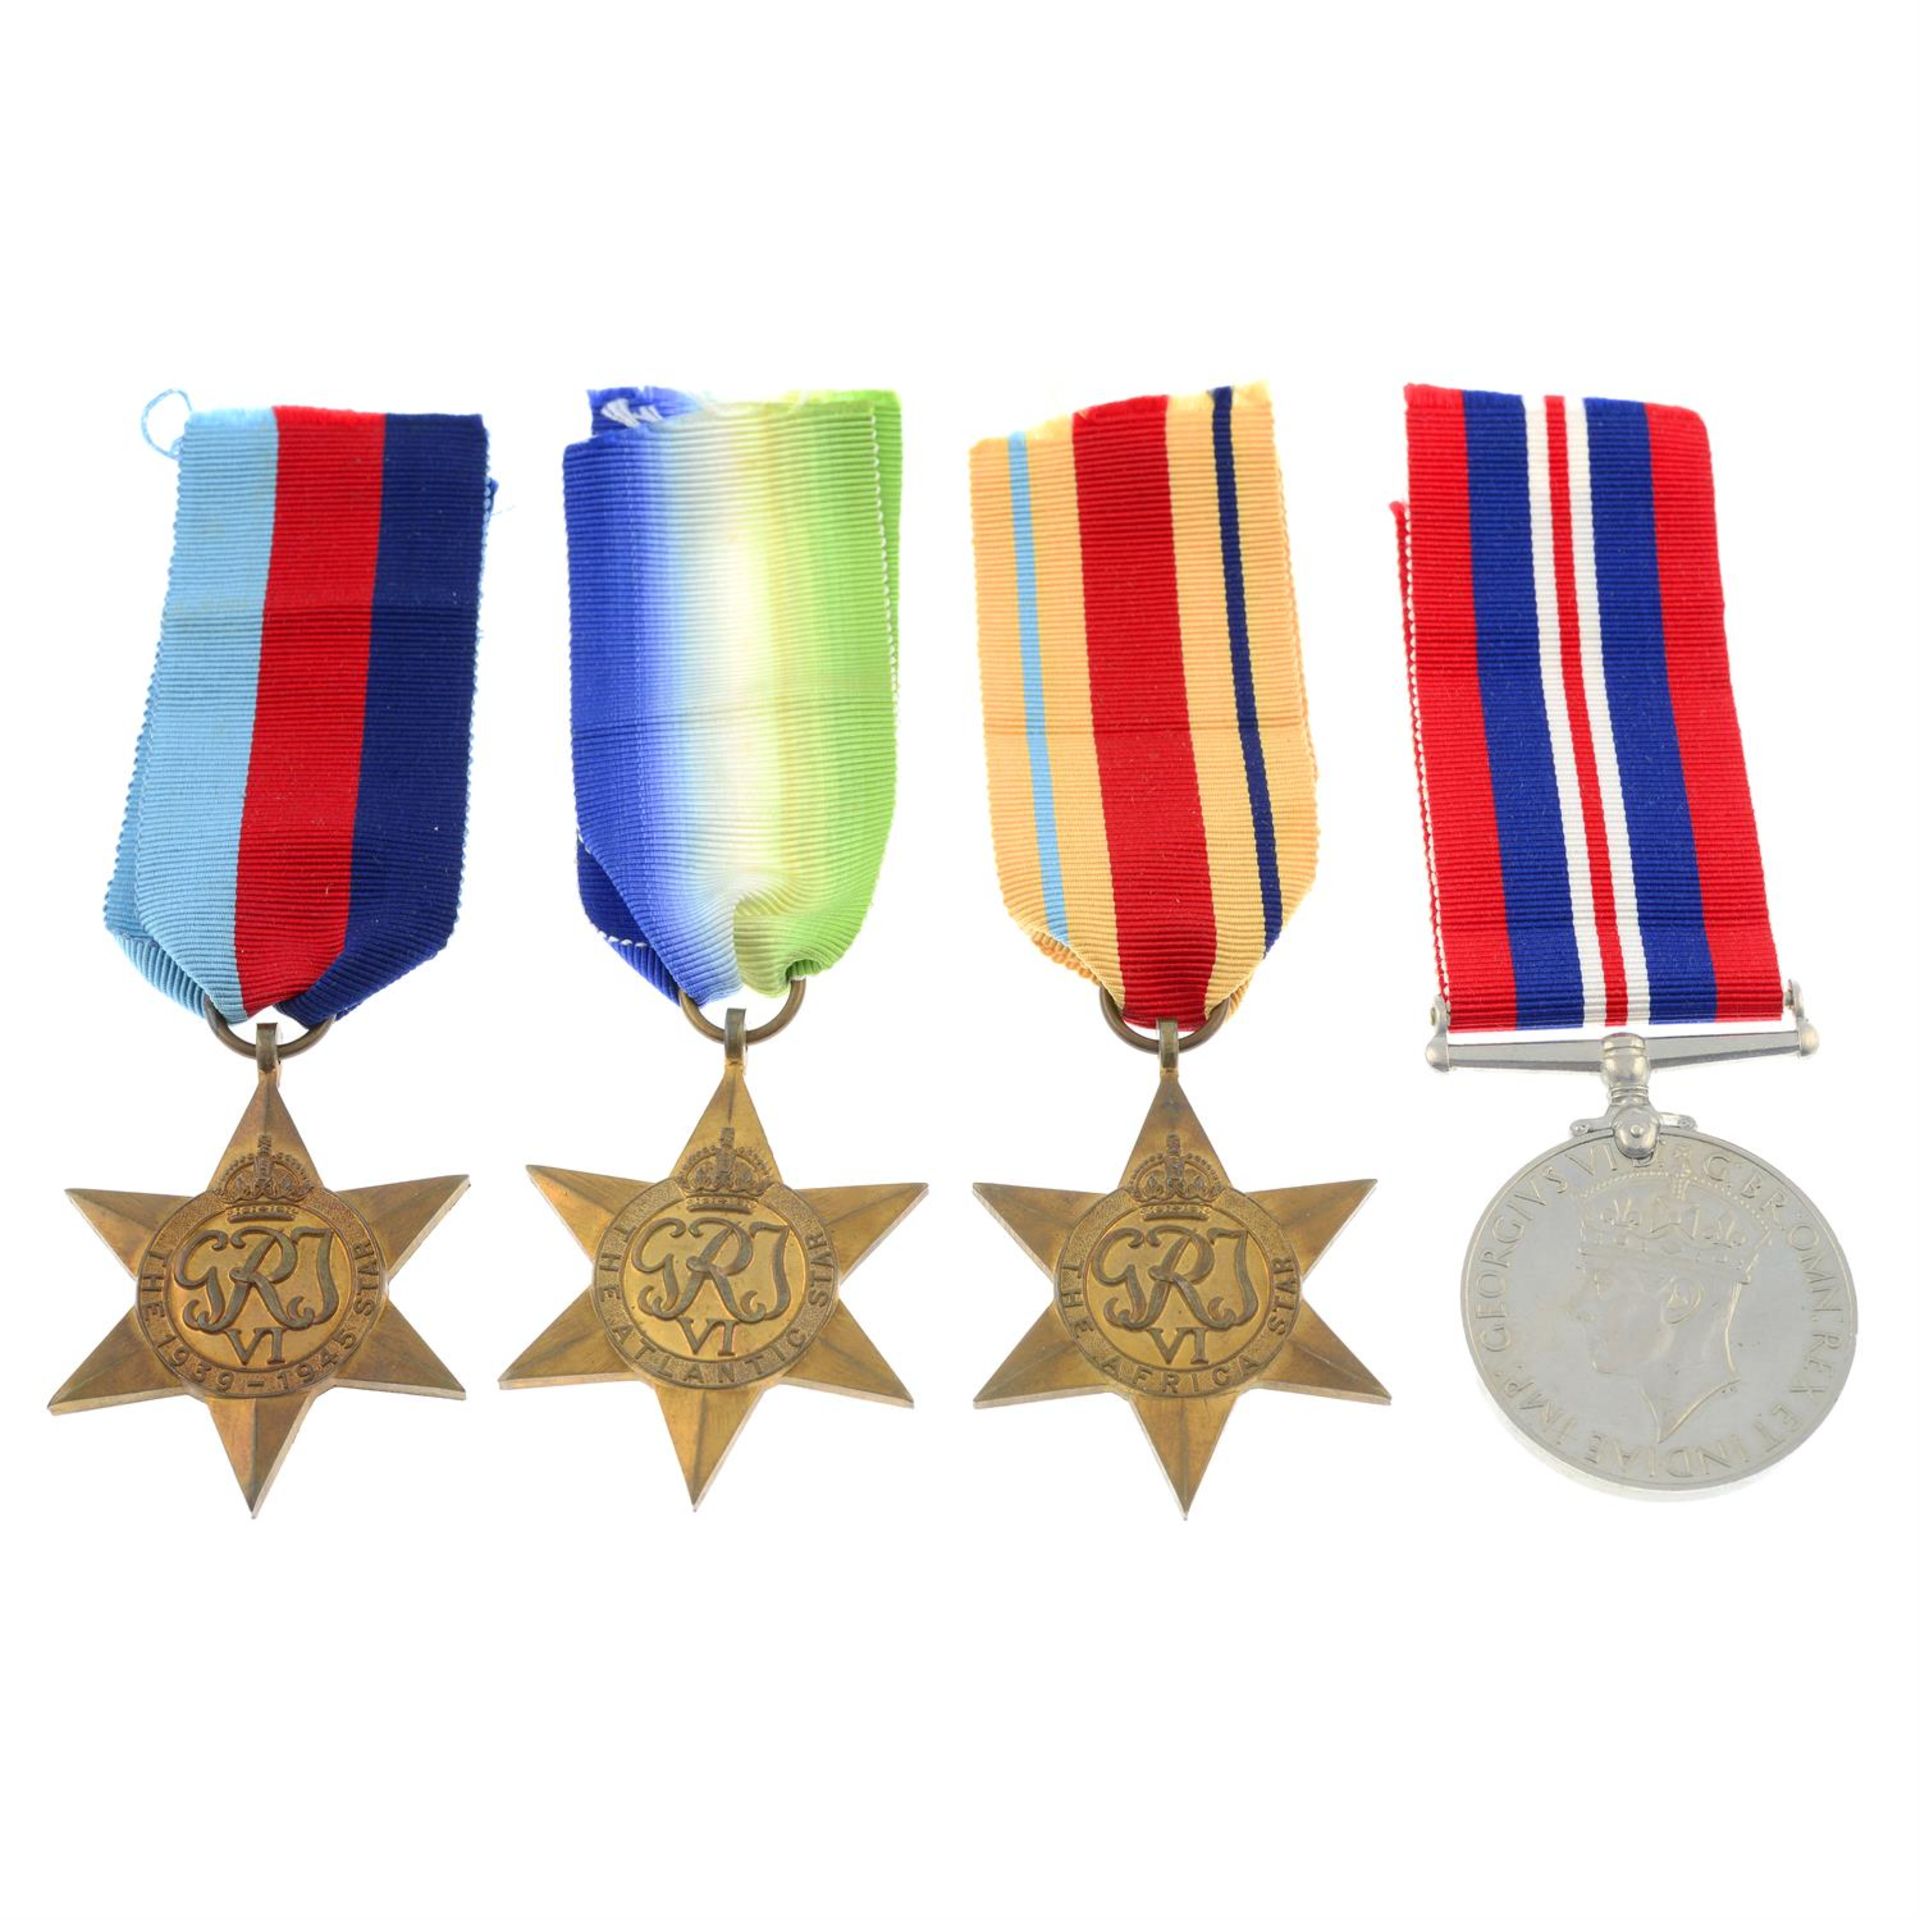 A group of four WWII medals with personal papers; together with another group of four with postage